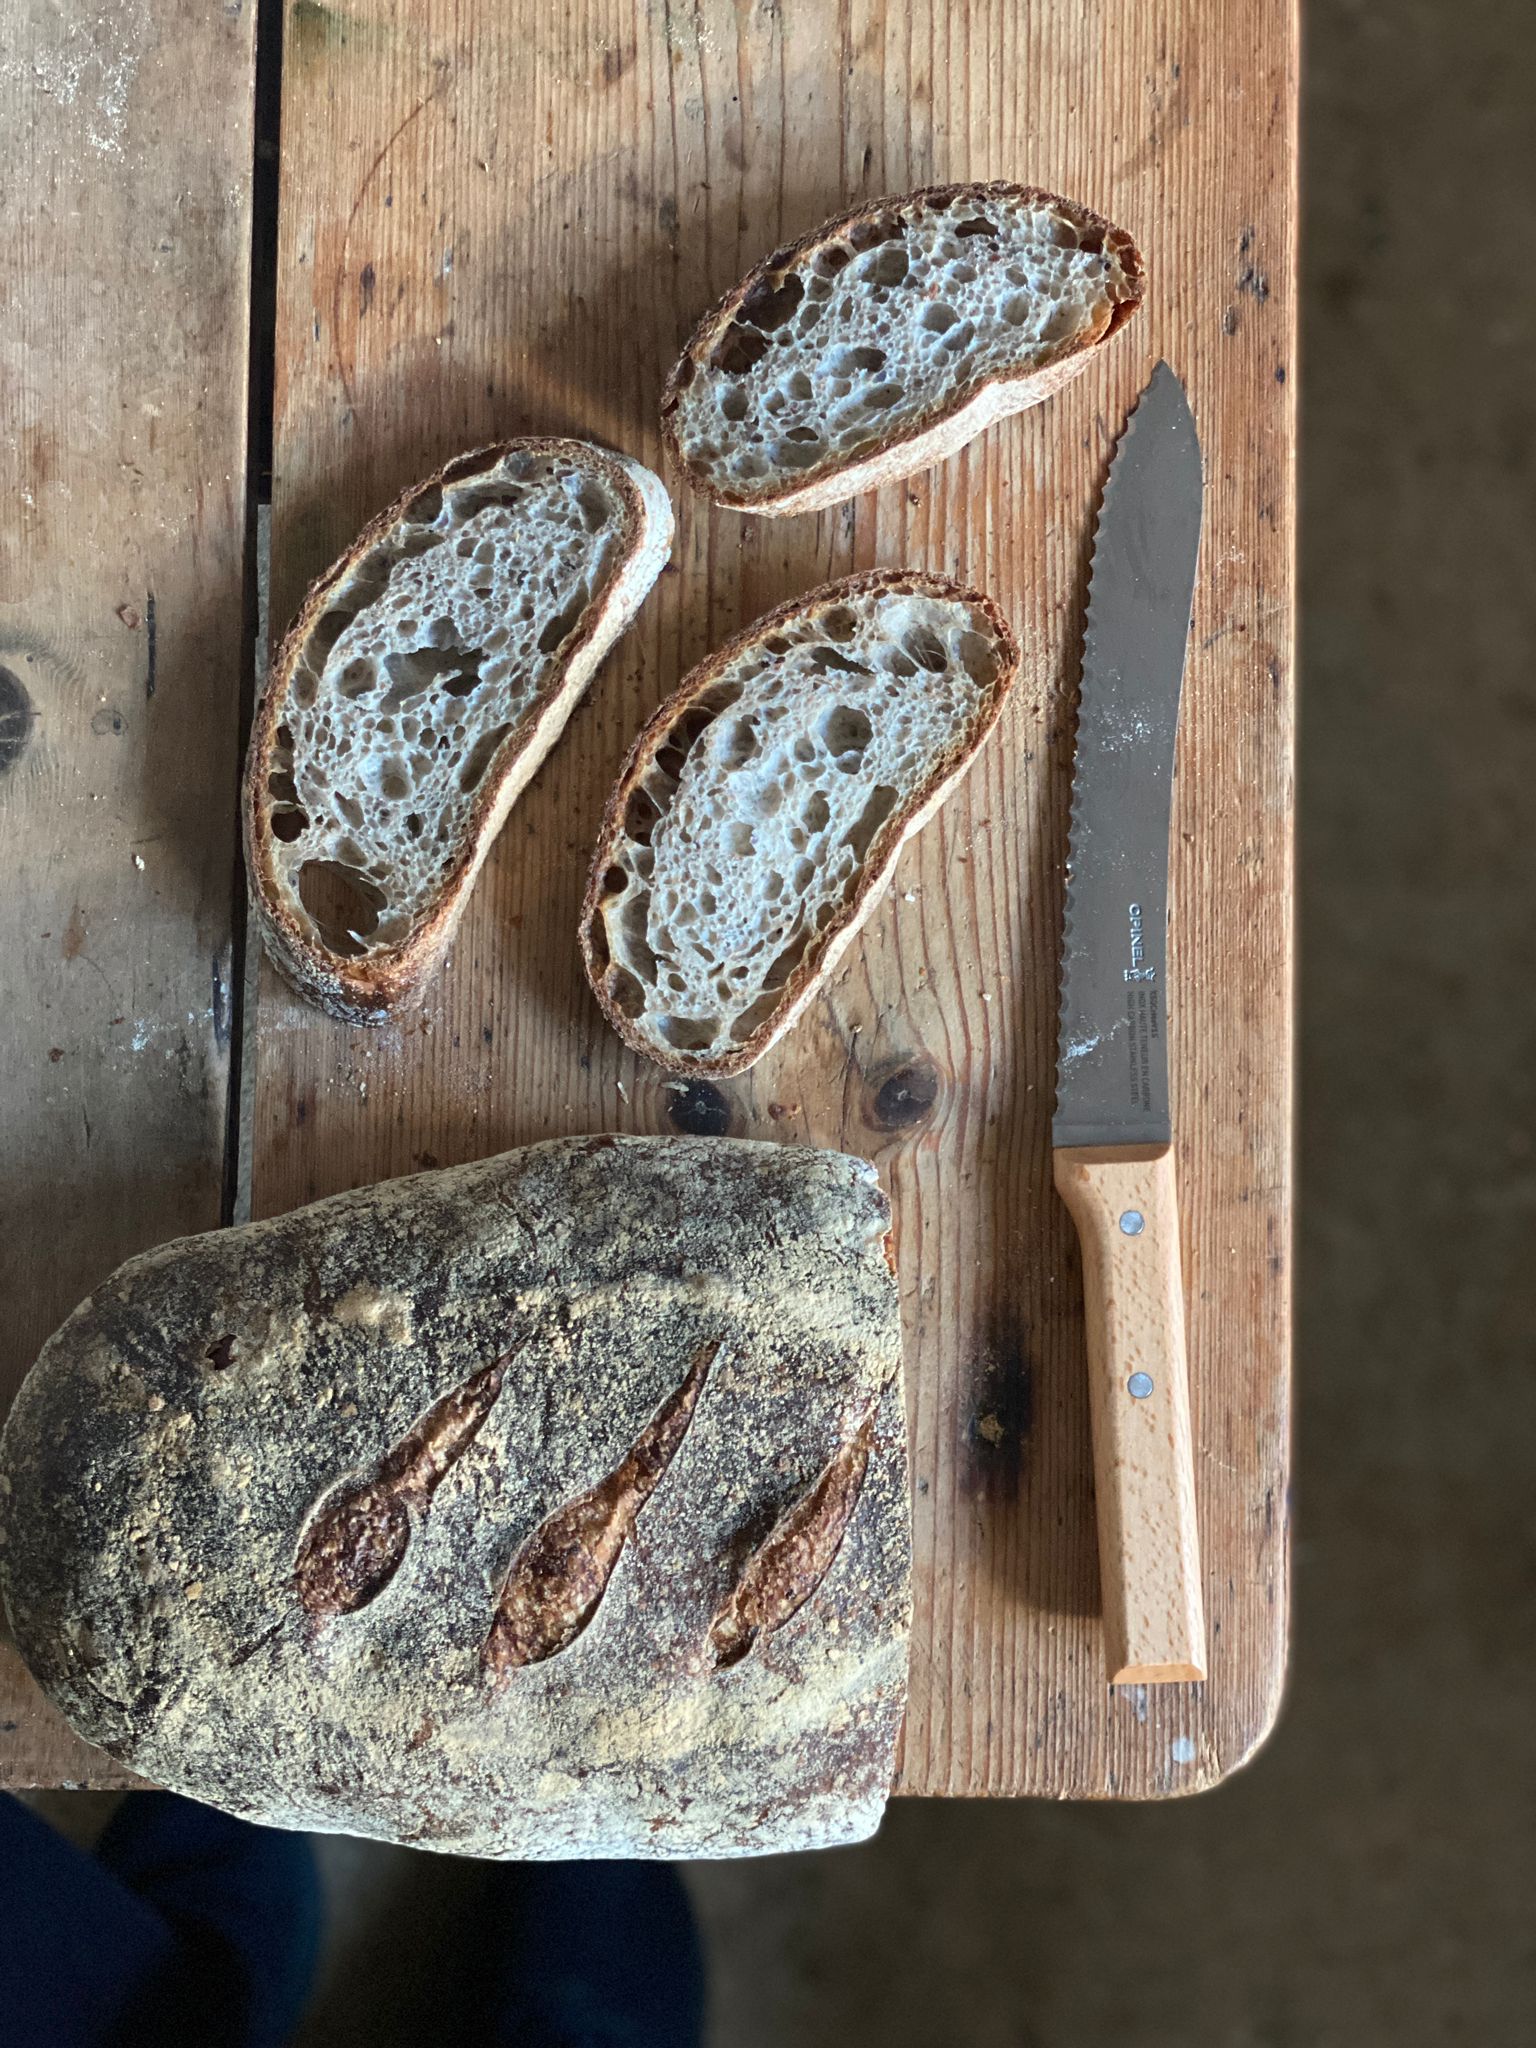 Opinel Bread Knife - Nutrition and Digestibility of Bread